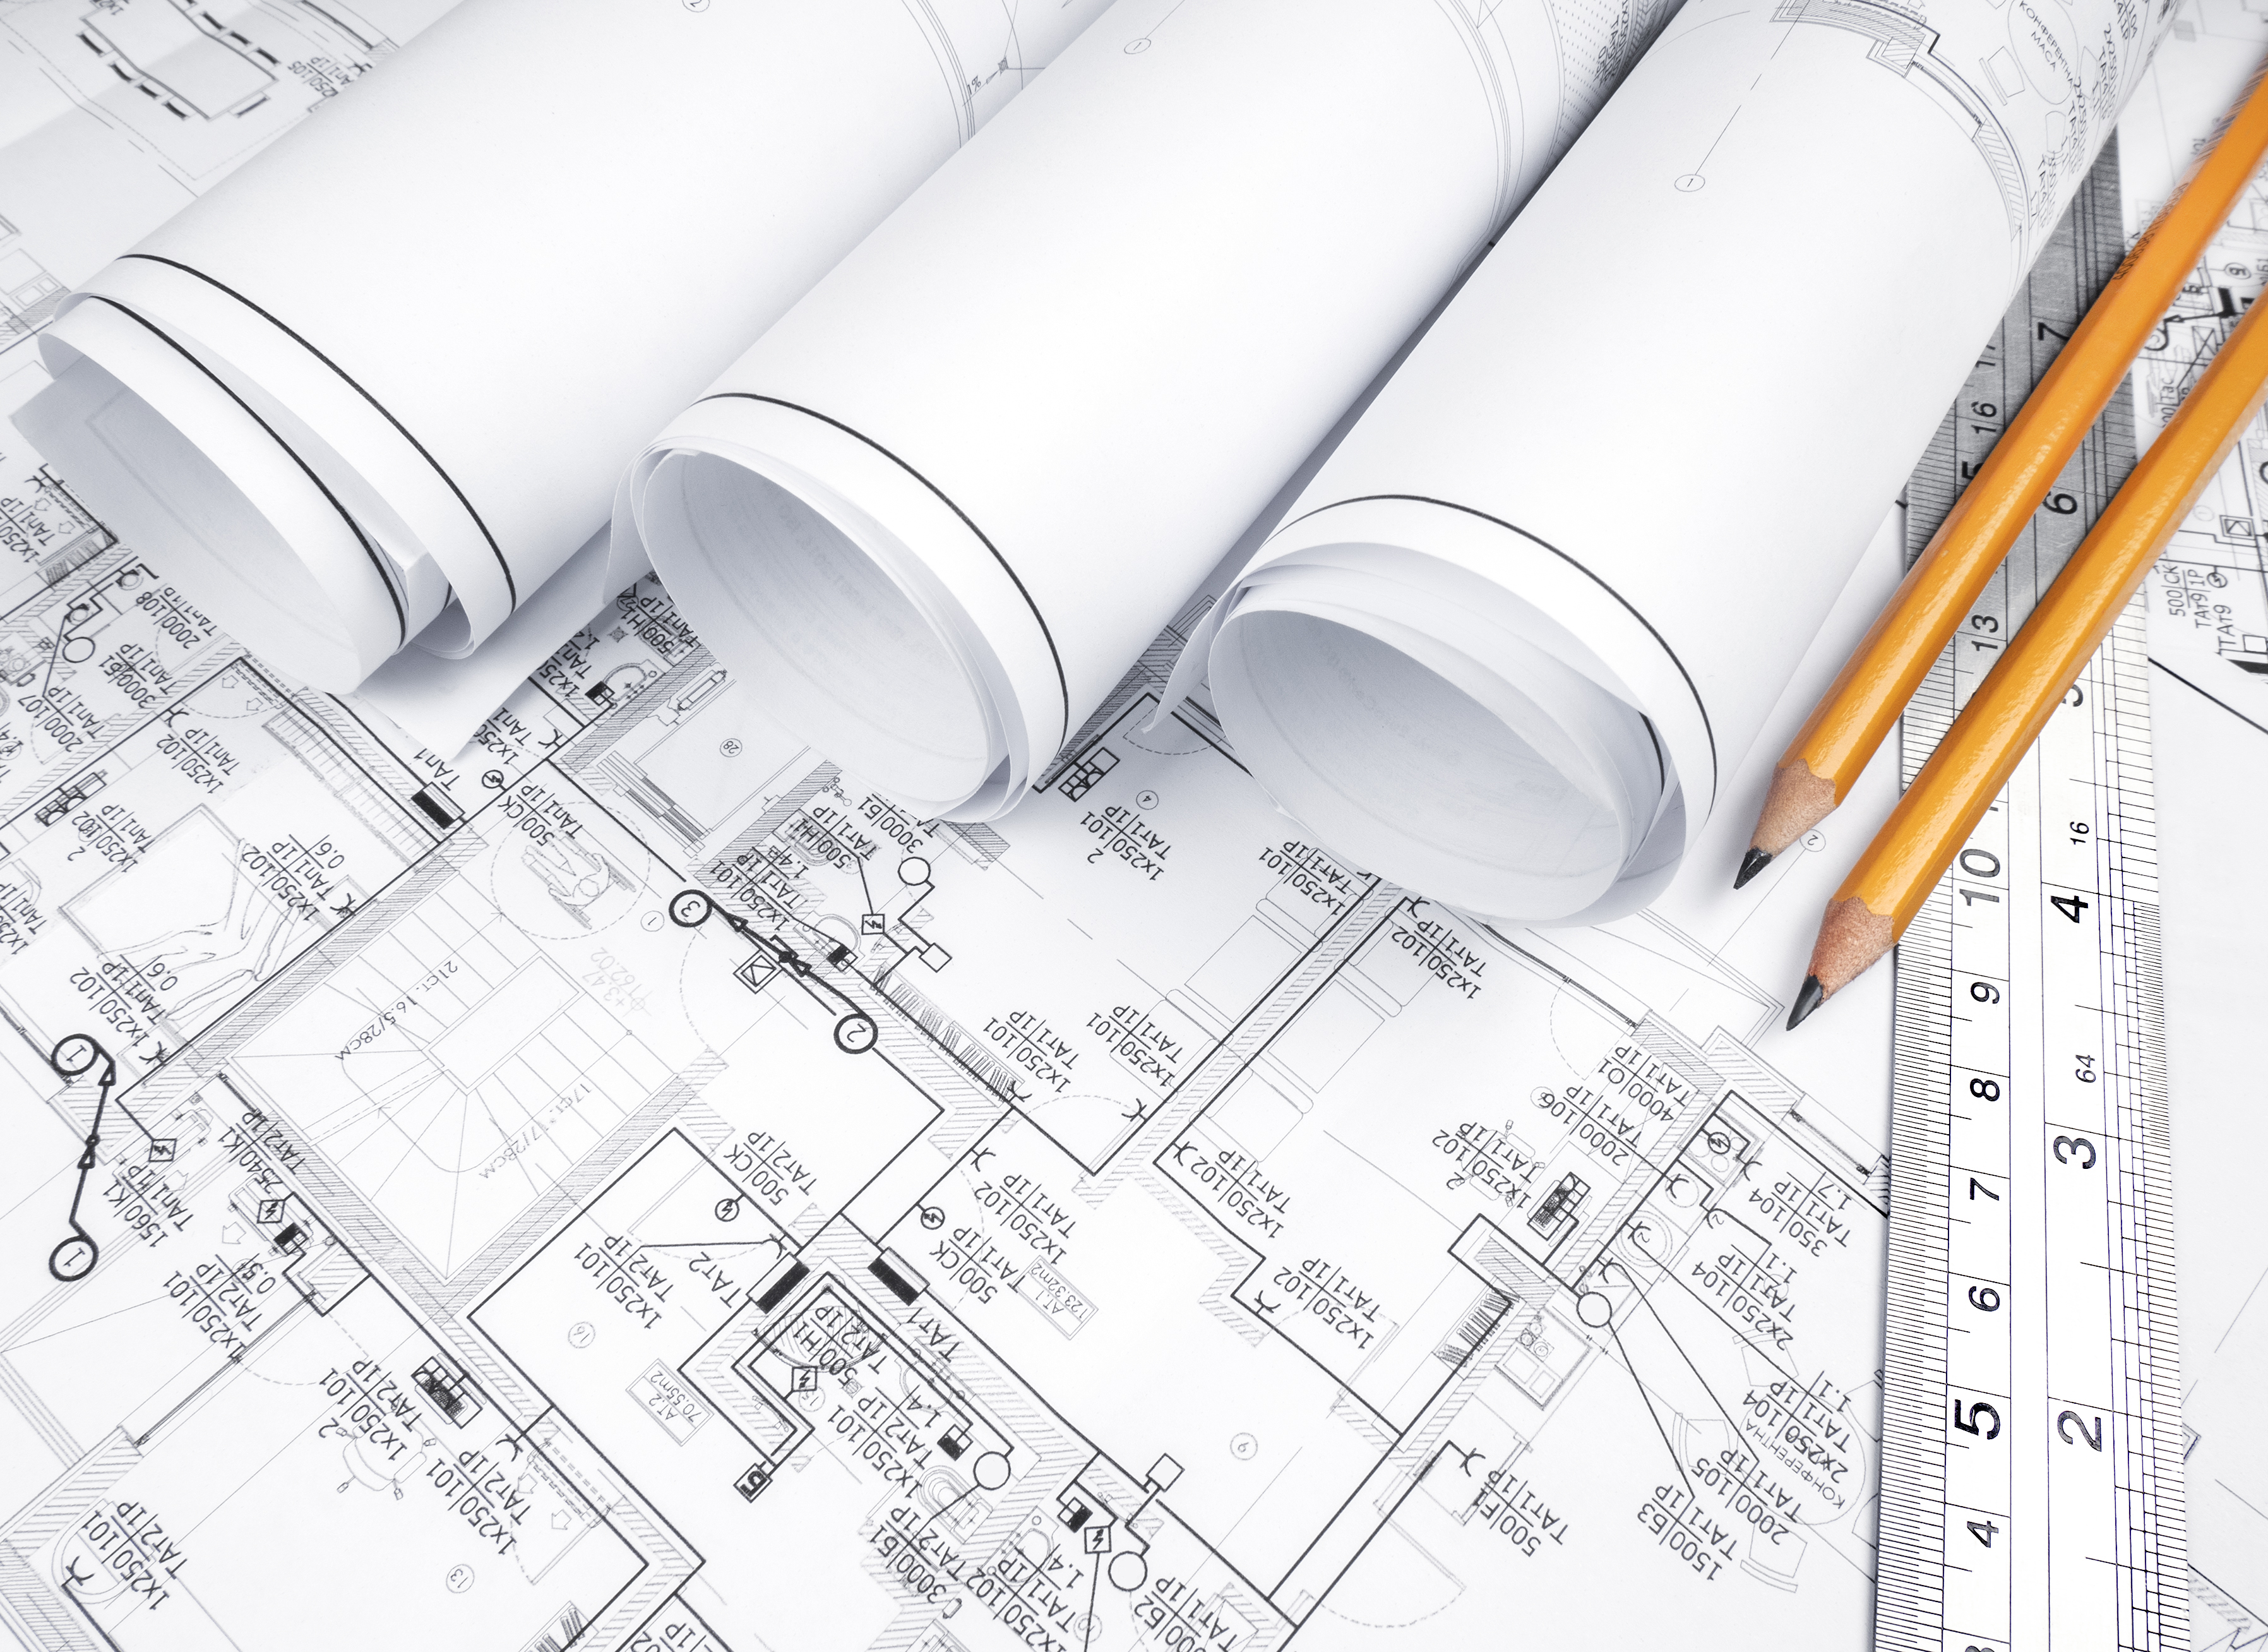 The plan of electrical installation